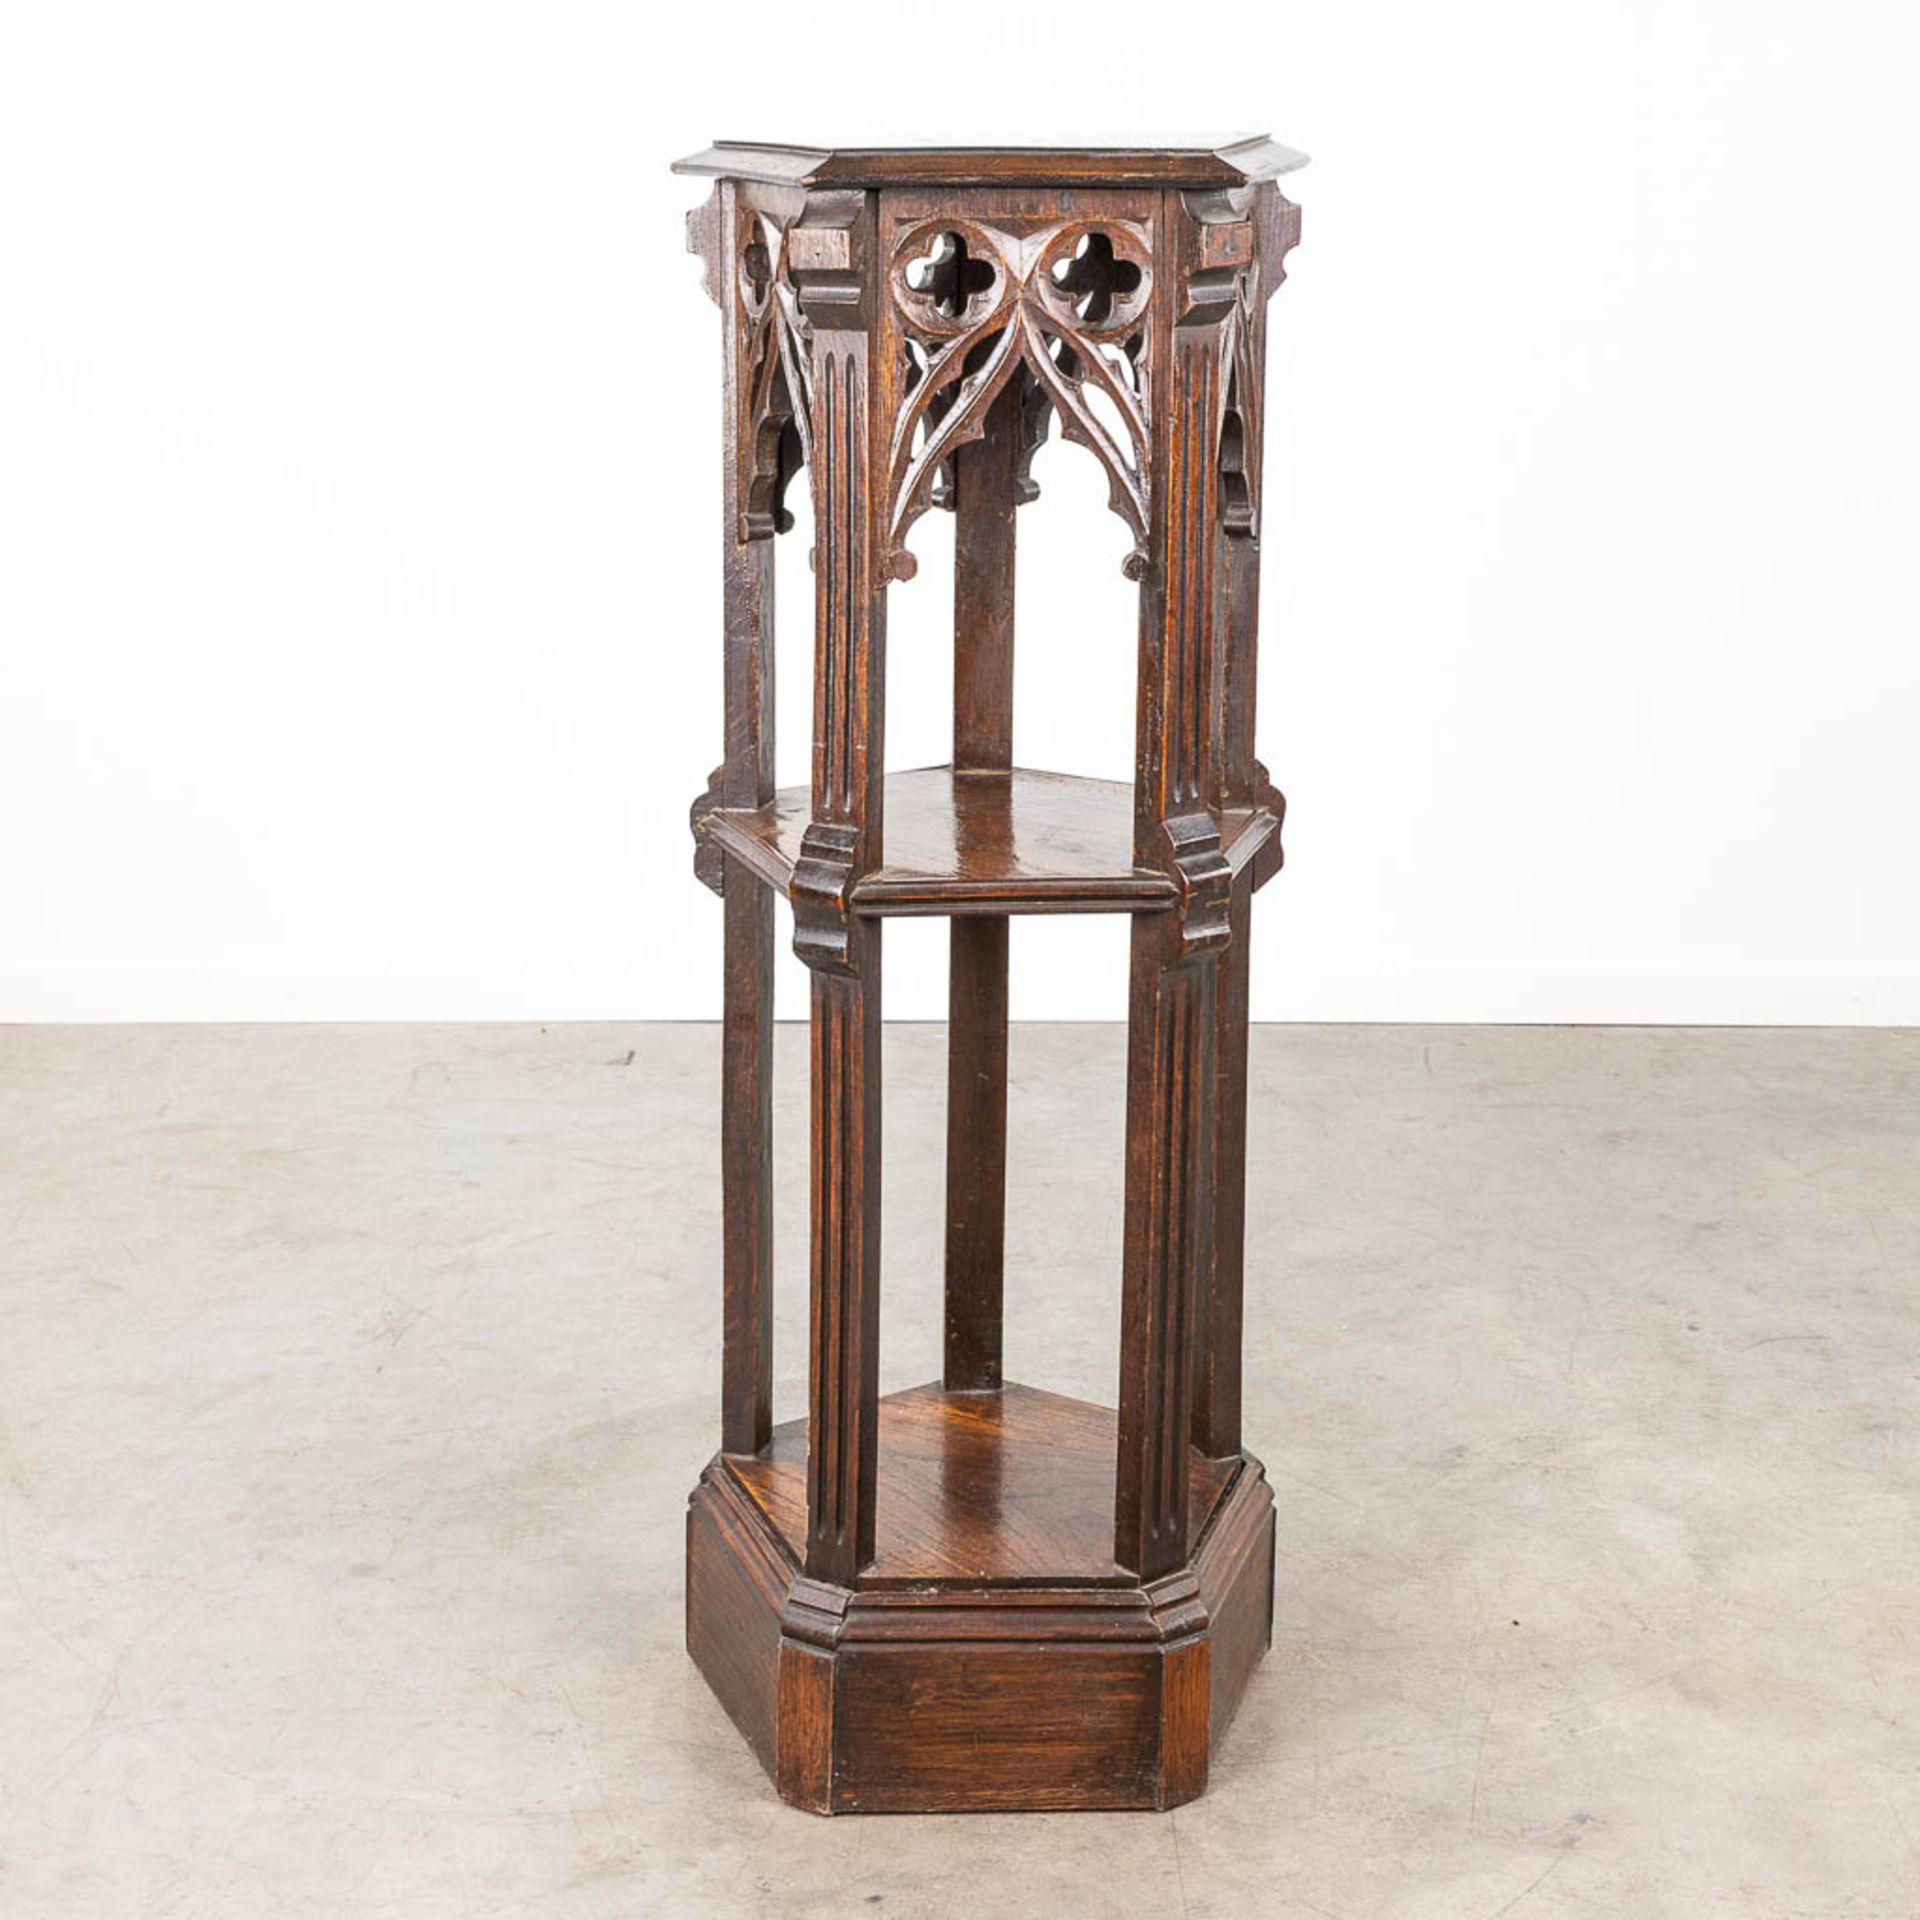 A pentagram pedestal, sculptured wood in Gothic Revival style. 19th C. (L: 41 x W: 46 x H: 111 cm) - Image 7 of 12